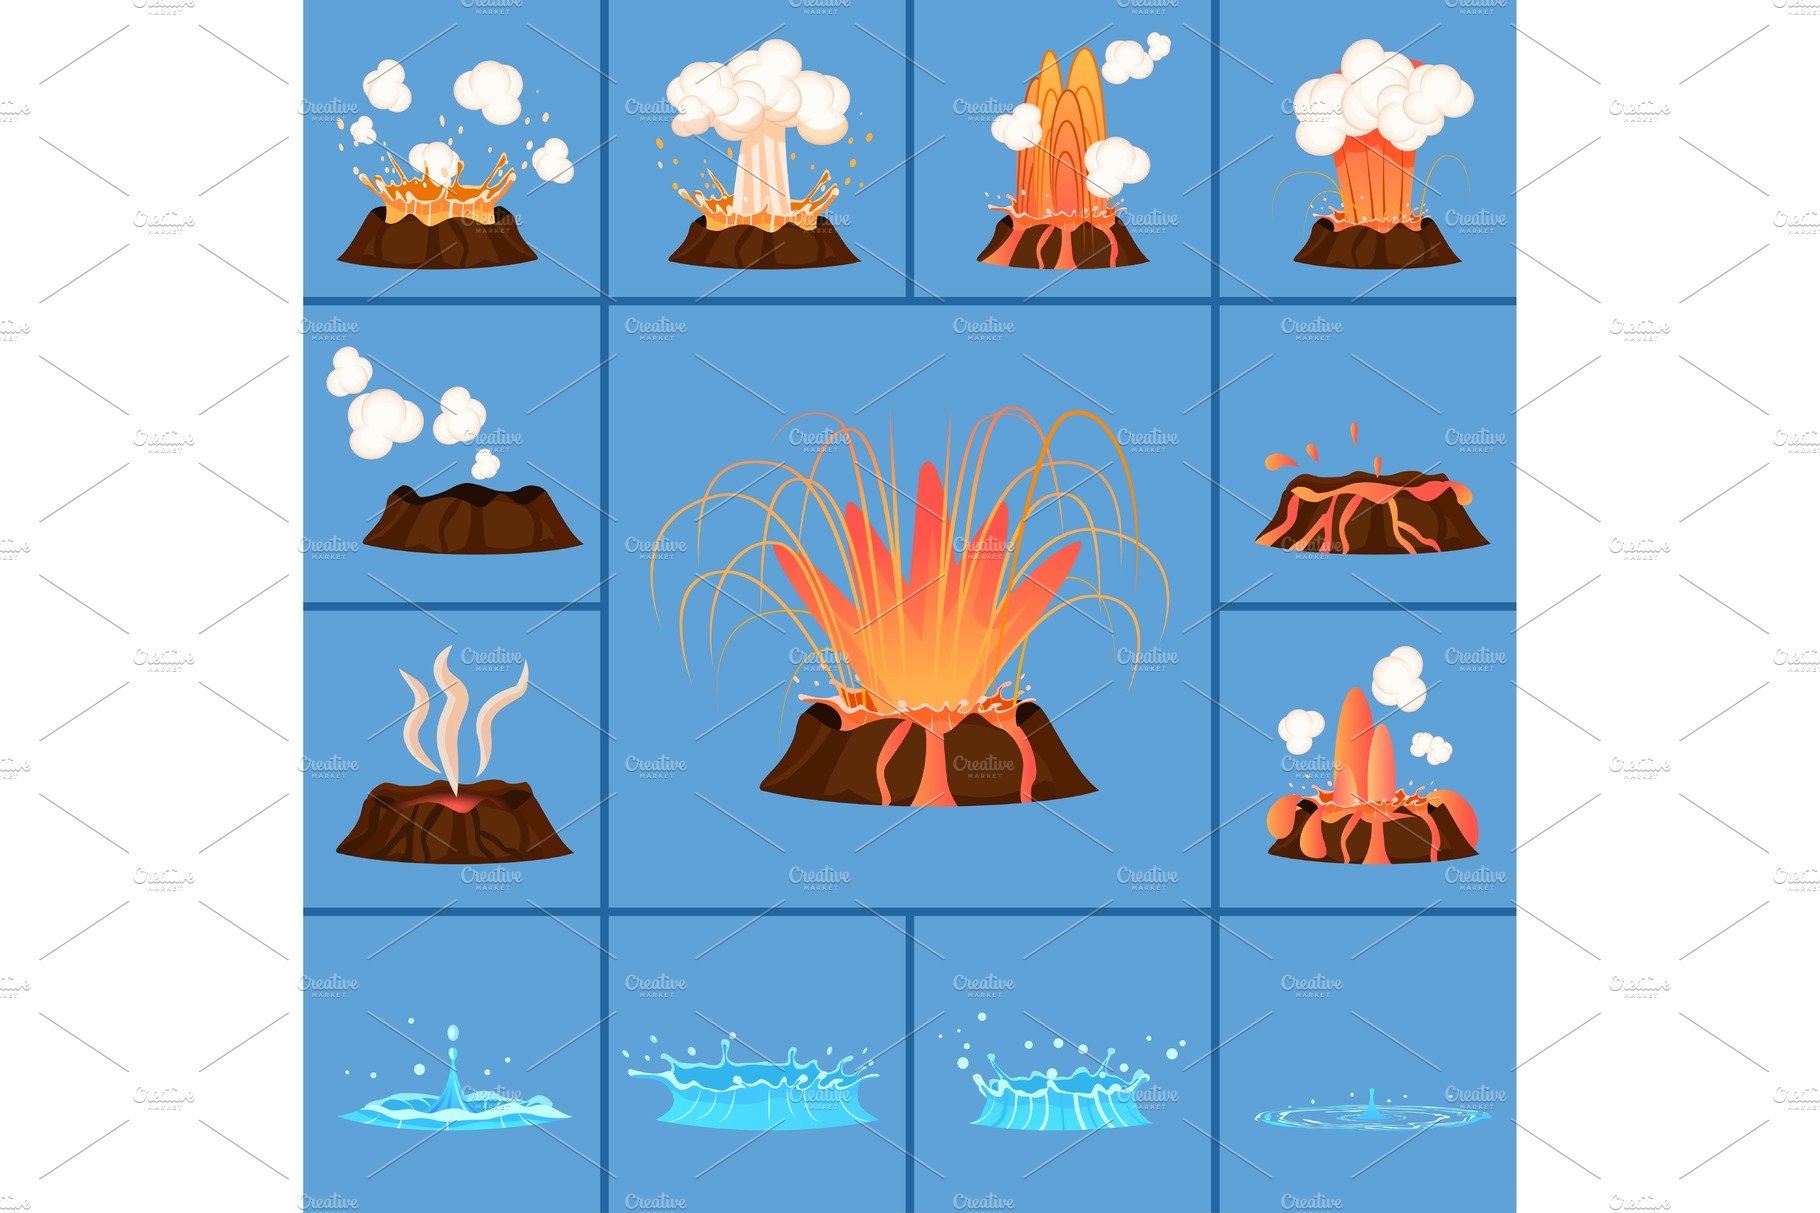 Concept of Active Volcano and Geyser cover image.